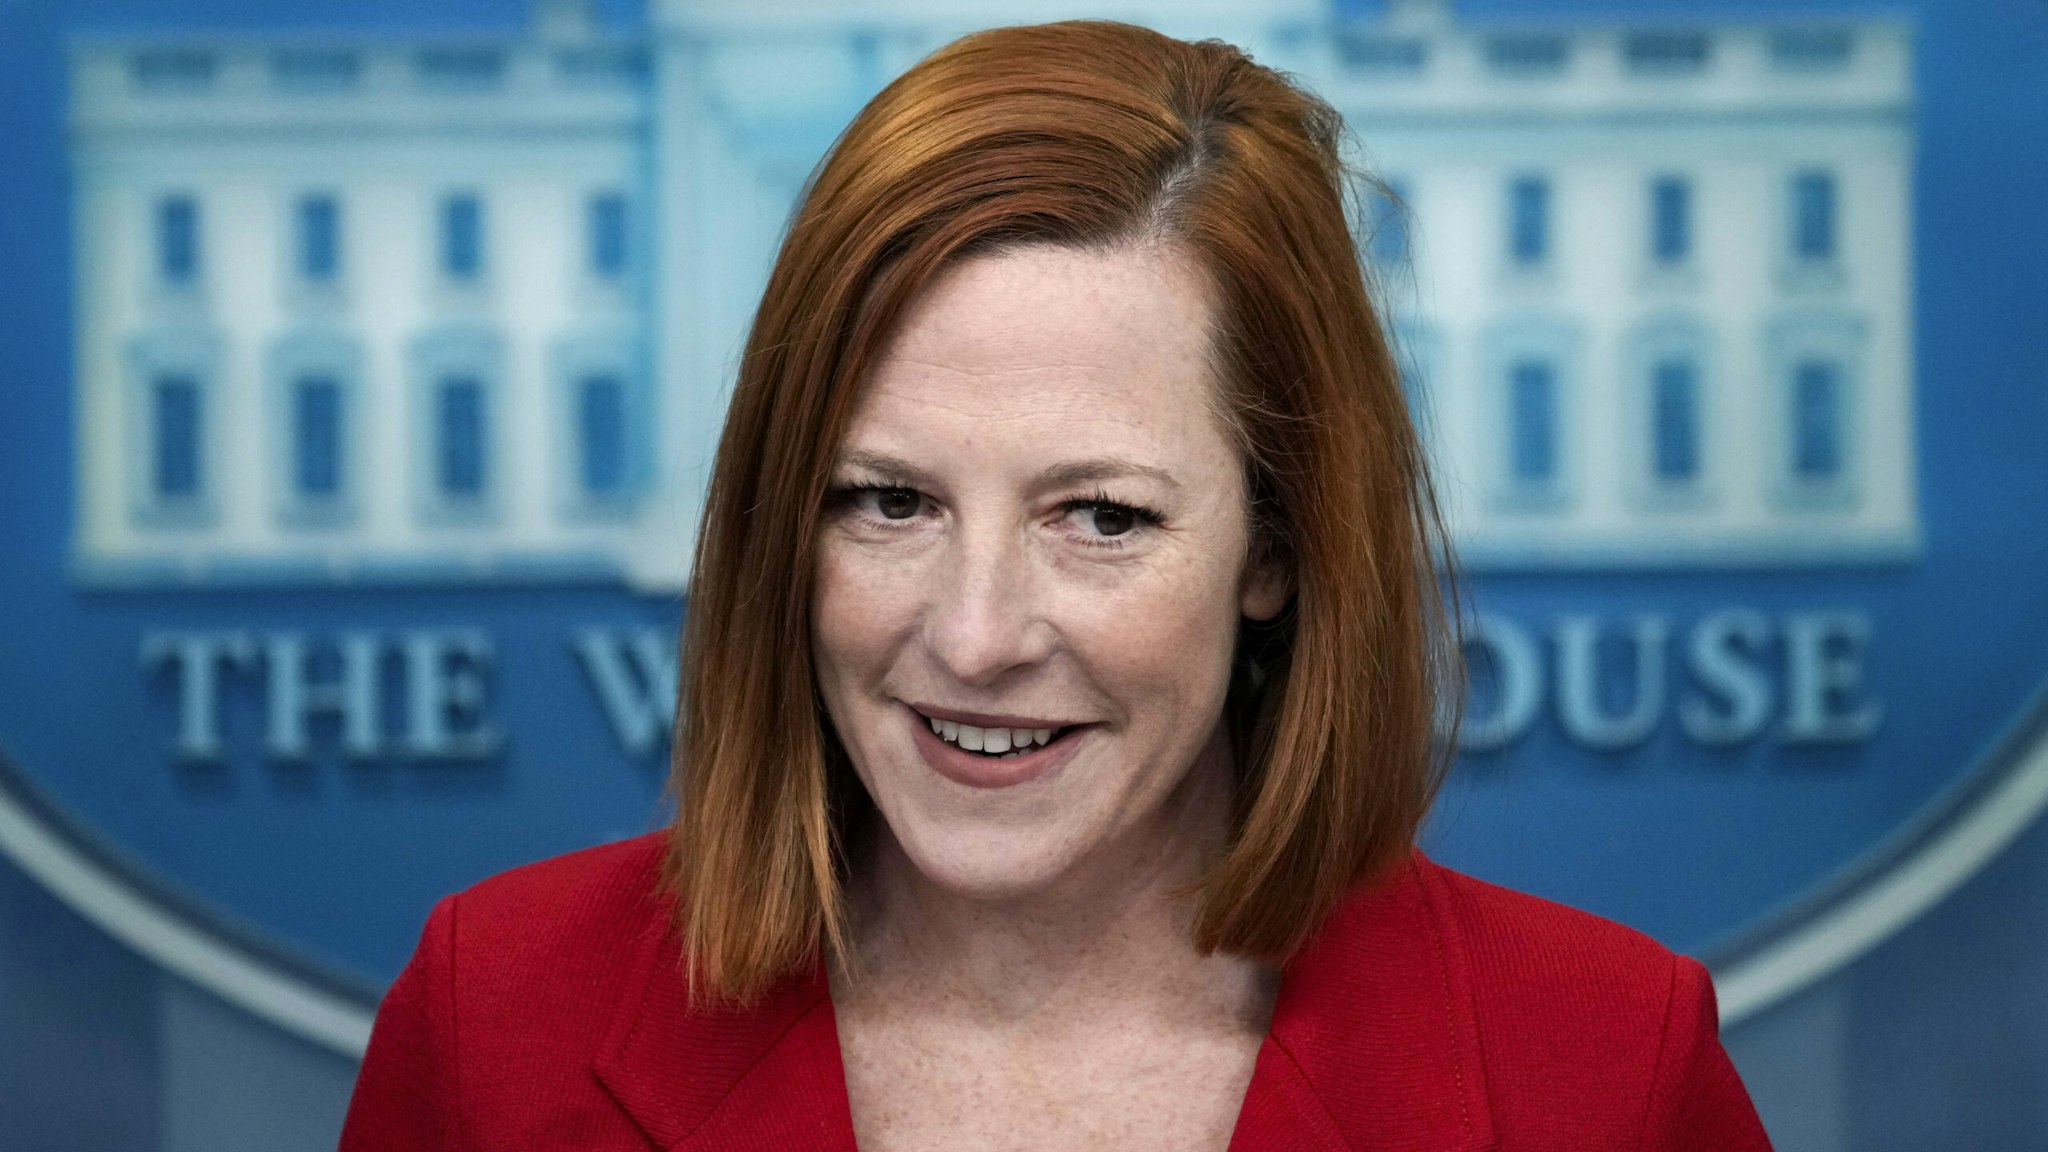 WASHINGTON, DC - JANUARY 26: White House Press Secretary Jen Psaki speaks during the daily press briefing at the White House on January 26, 2022 in Washington, DC. Psaki declined to take questions about White House plans amidst media reports that Supreme Court Justice Stephen Breyer is planning to retire from the U.S. Supreme Court.